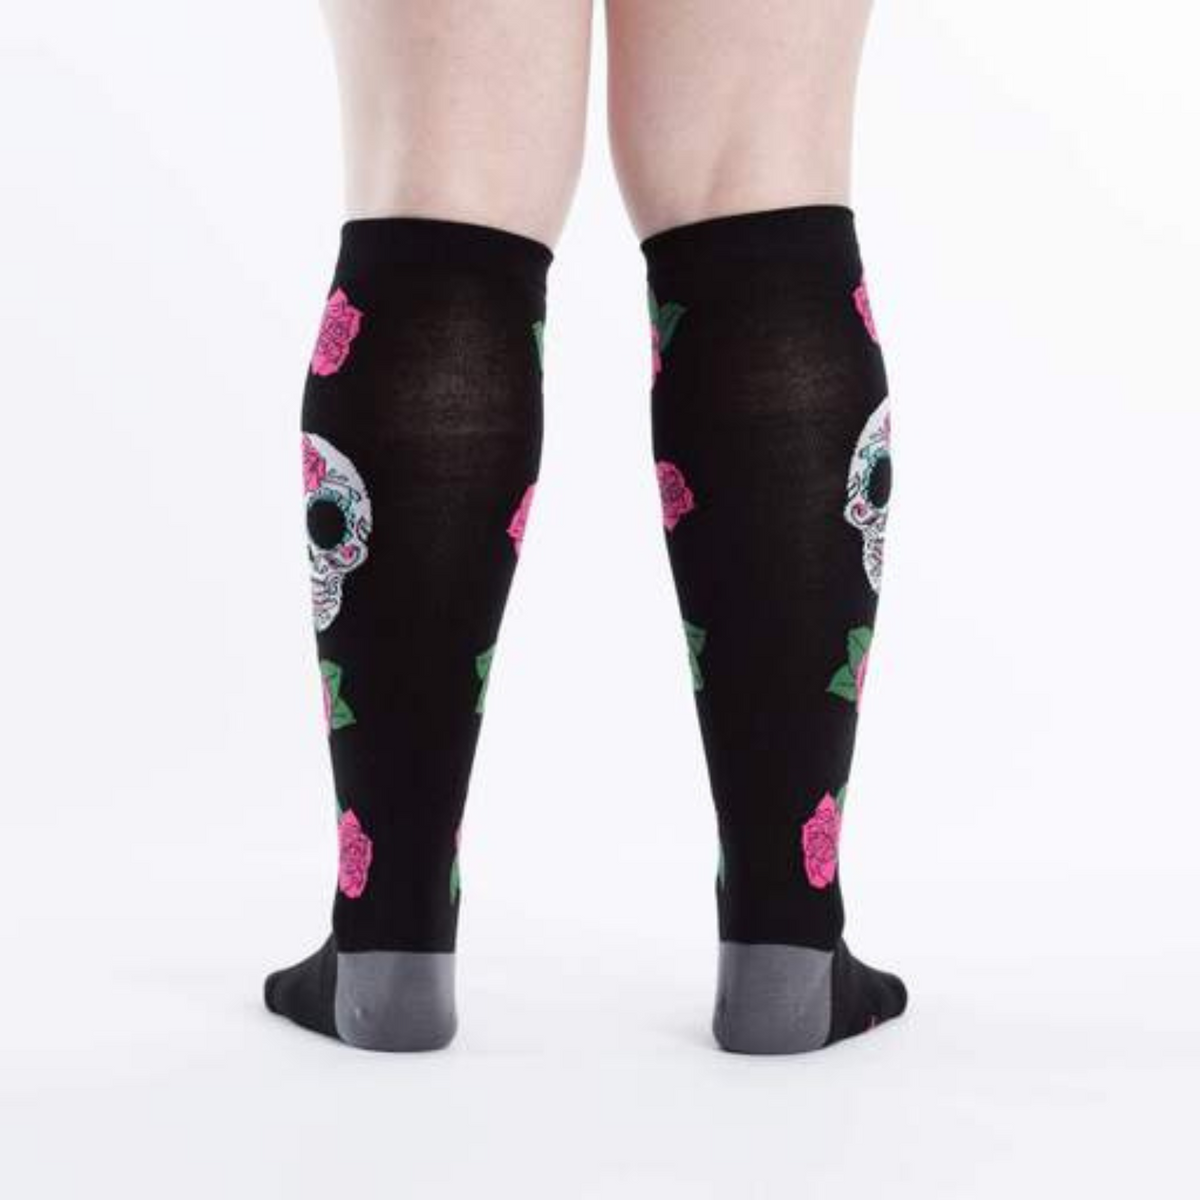 Sock It To Me Sugar Skull women&#39;s knee high sock featuring black sock with red roses all over and large Day of the Dead Sugar Skull. Socks worn by model seen from behind. 